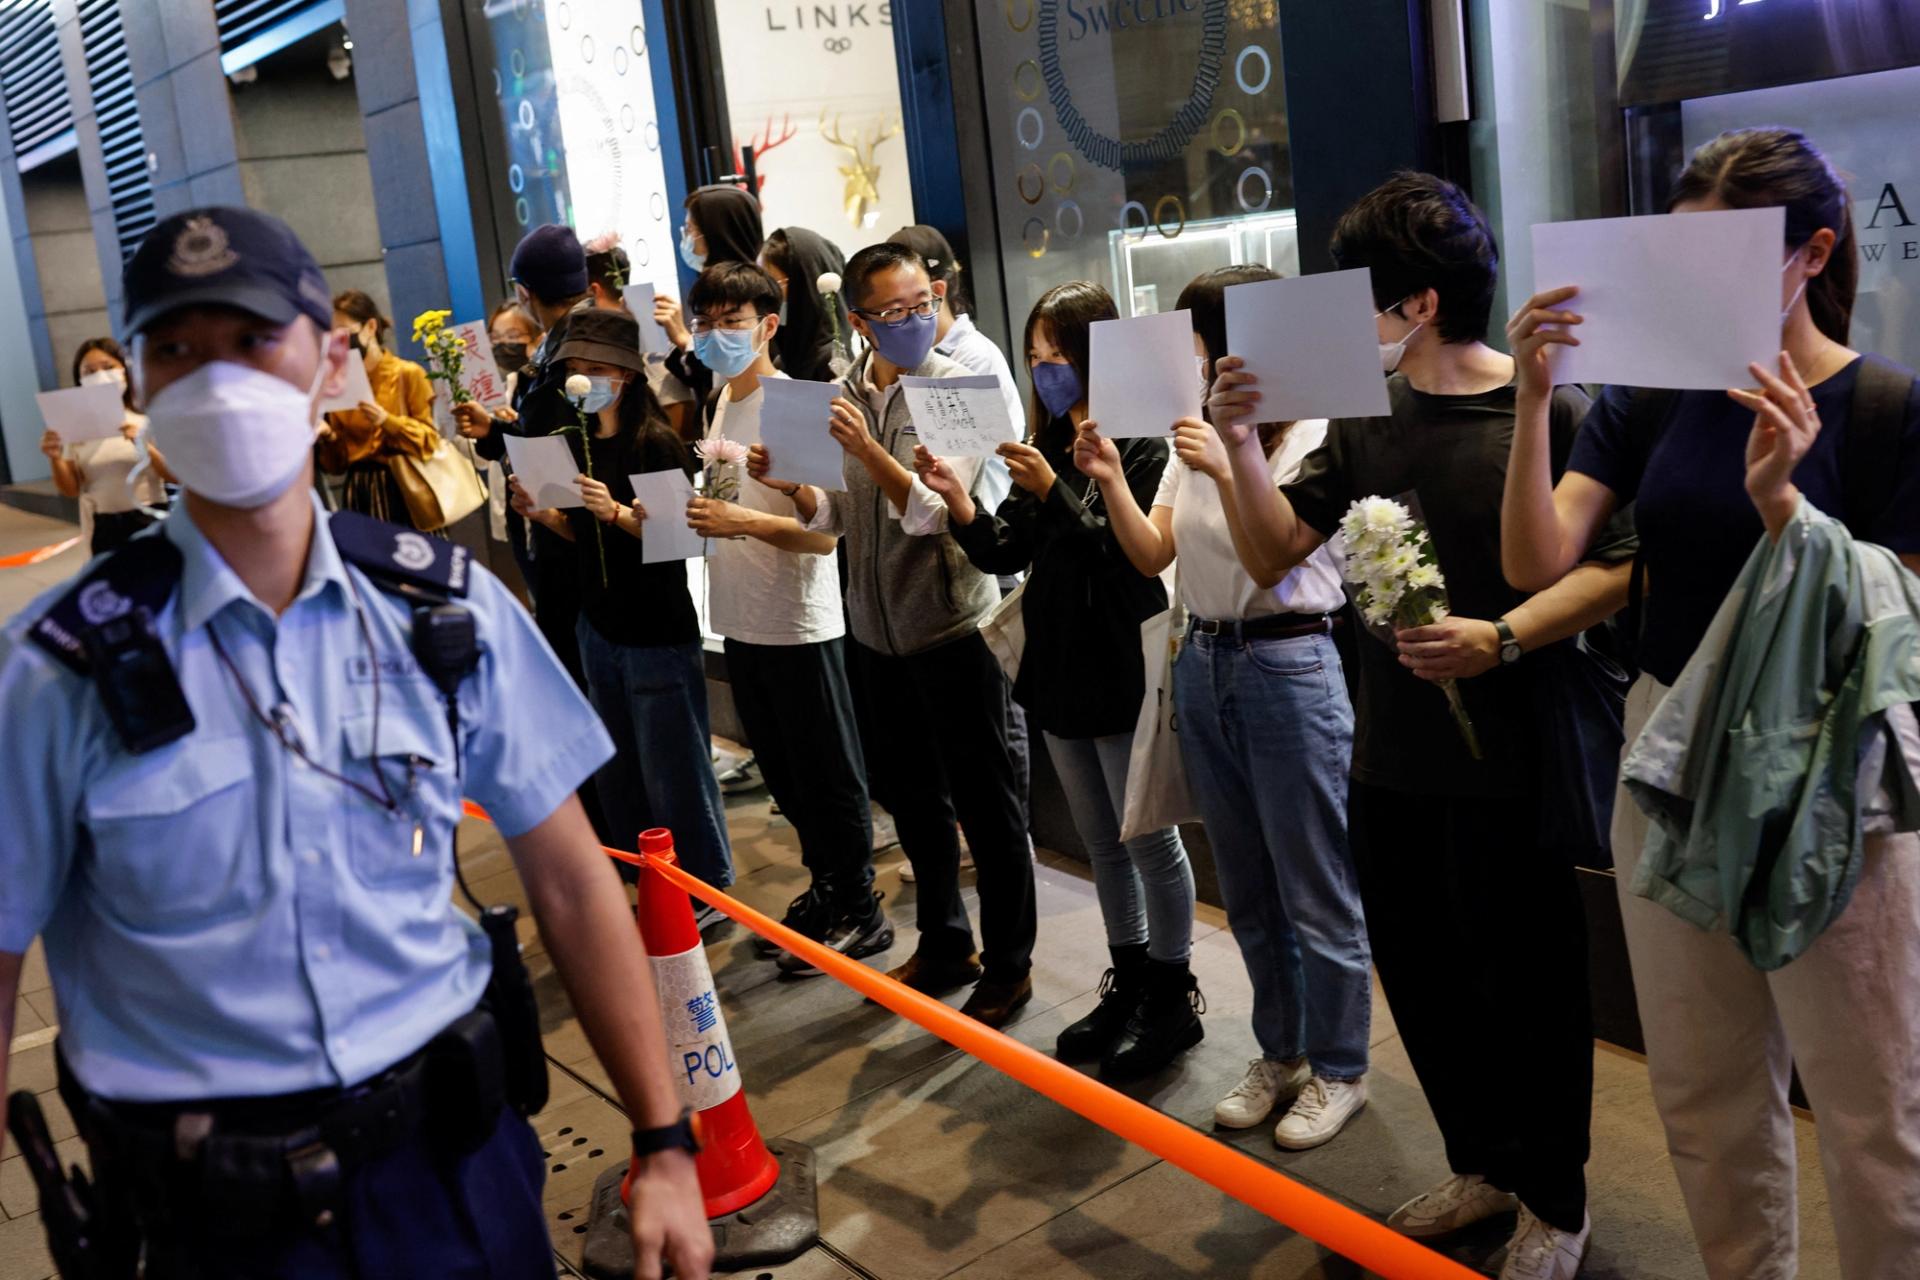 People hold white sheets of paper and flowers at a protest in Hong Kong.